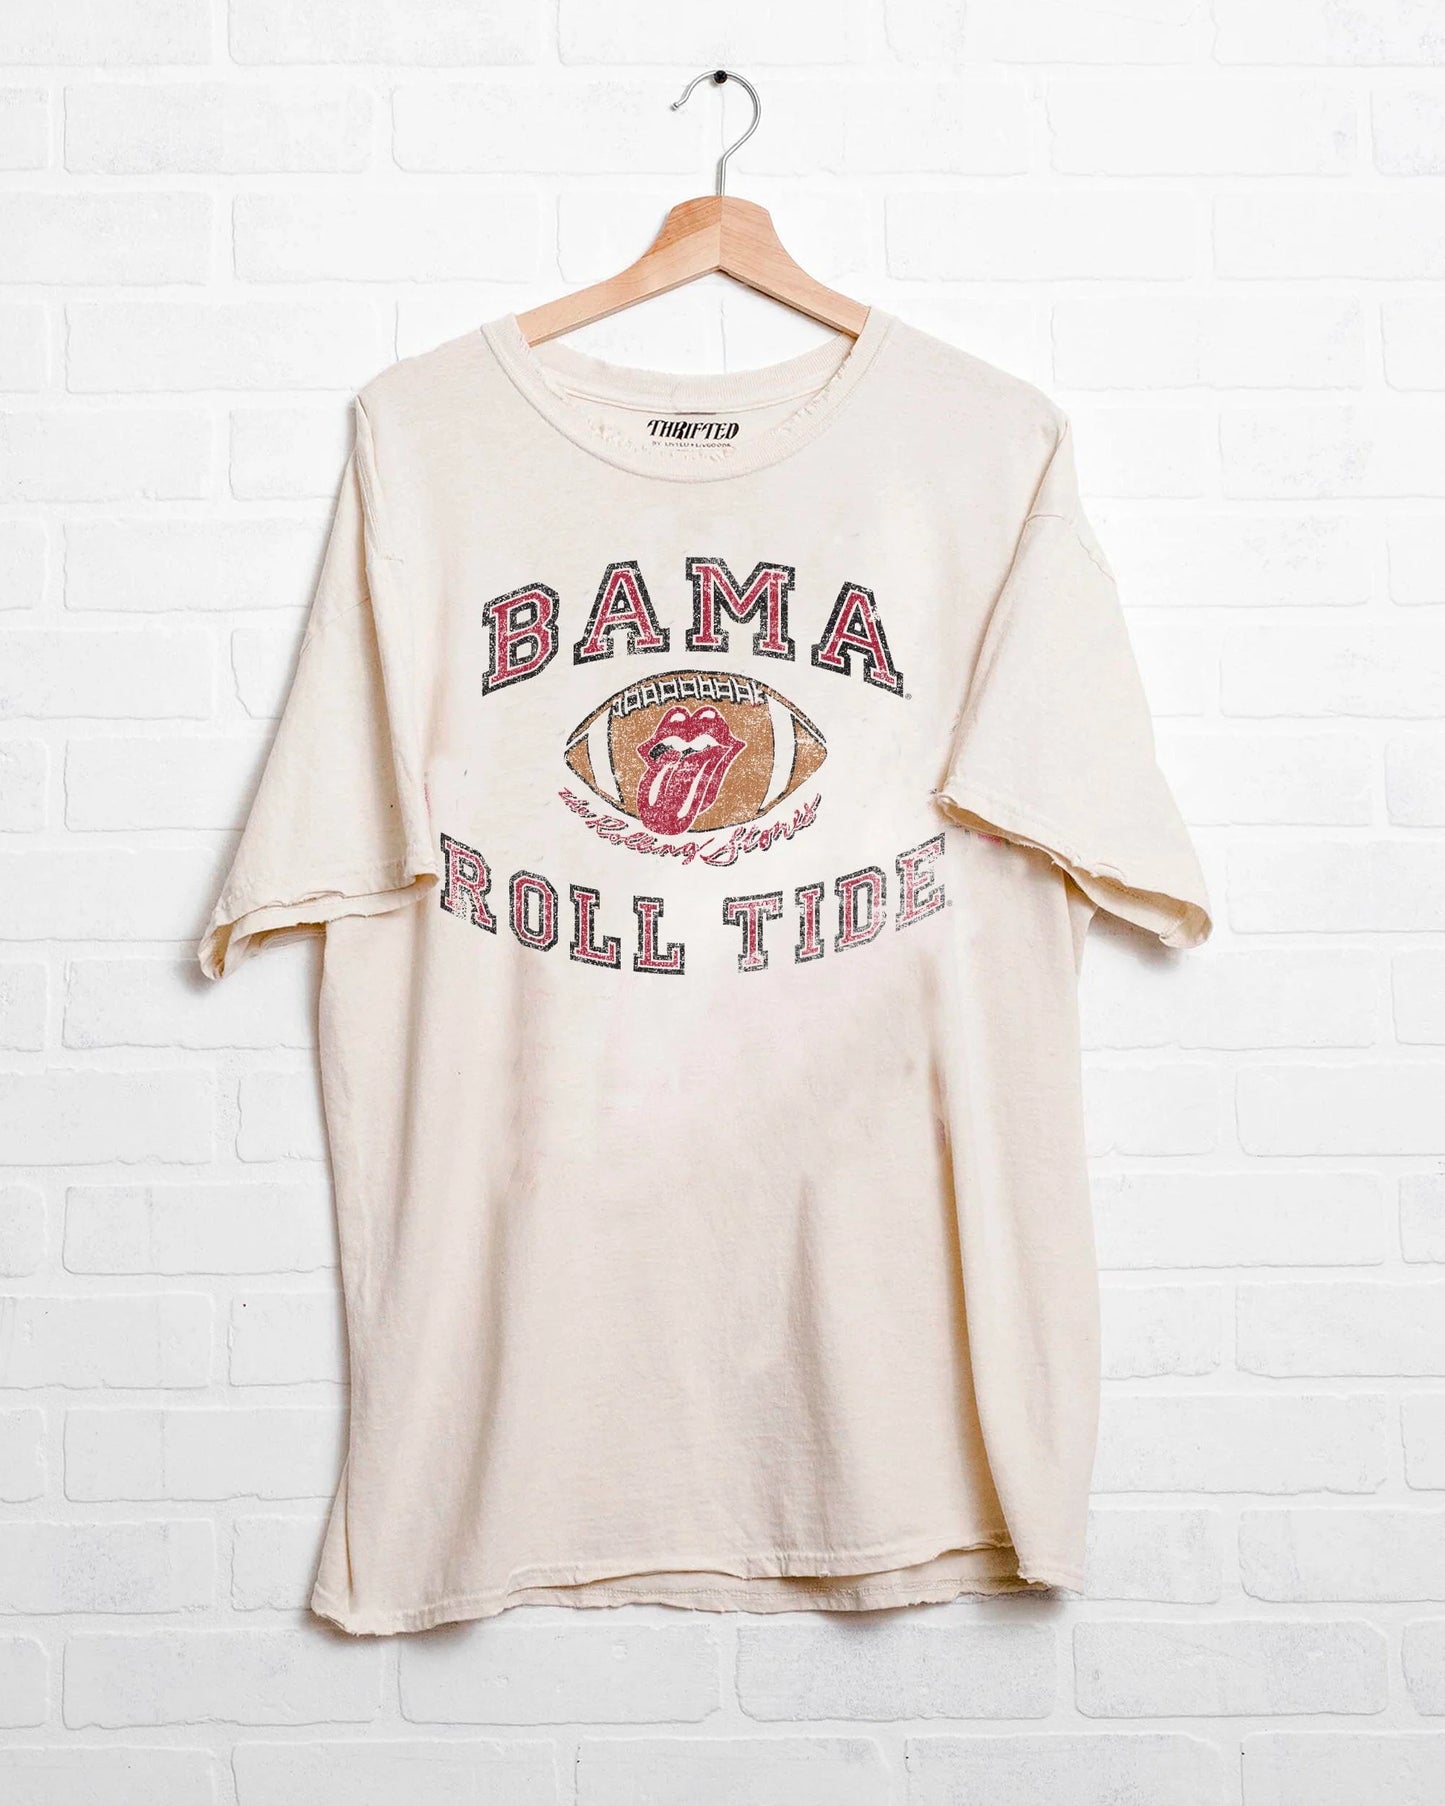 Roll Tide Thrifted Tee